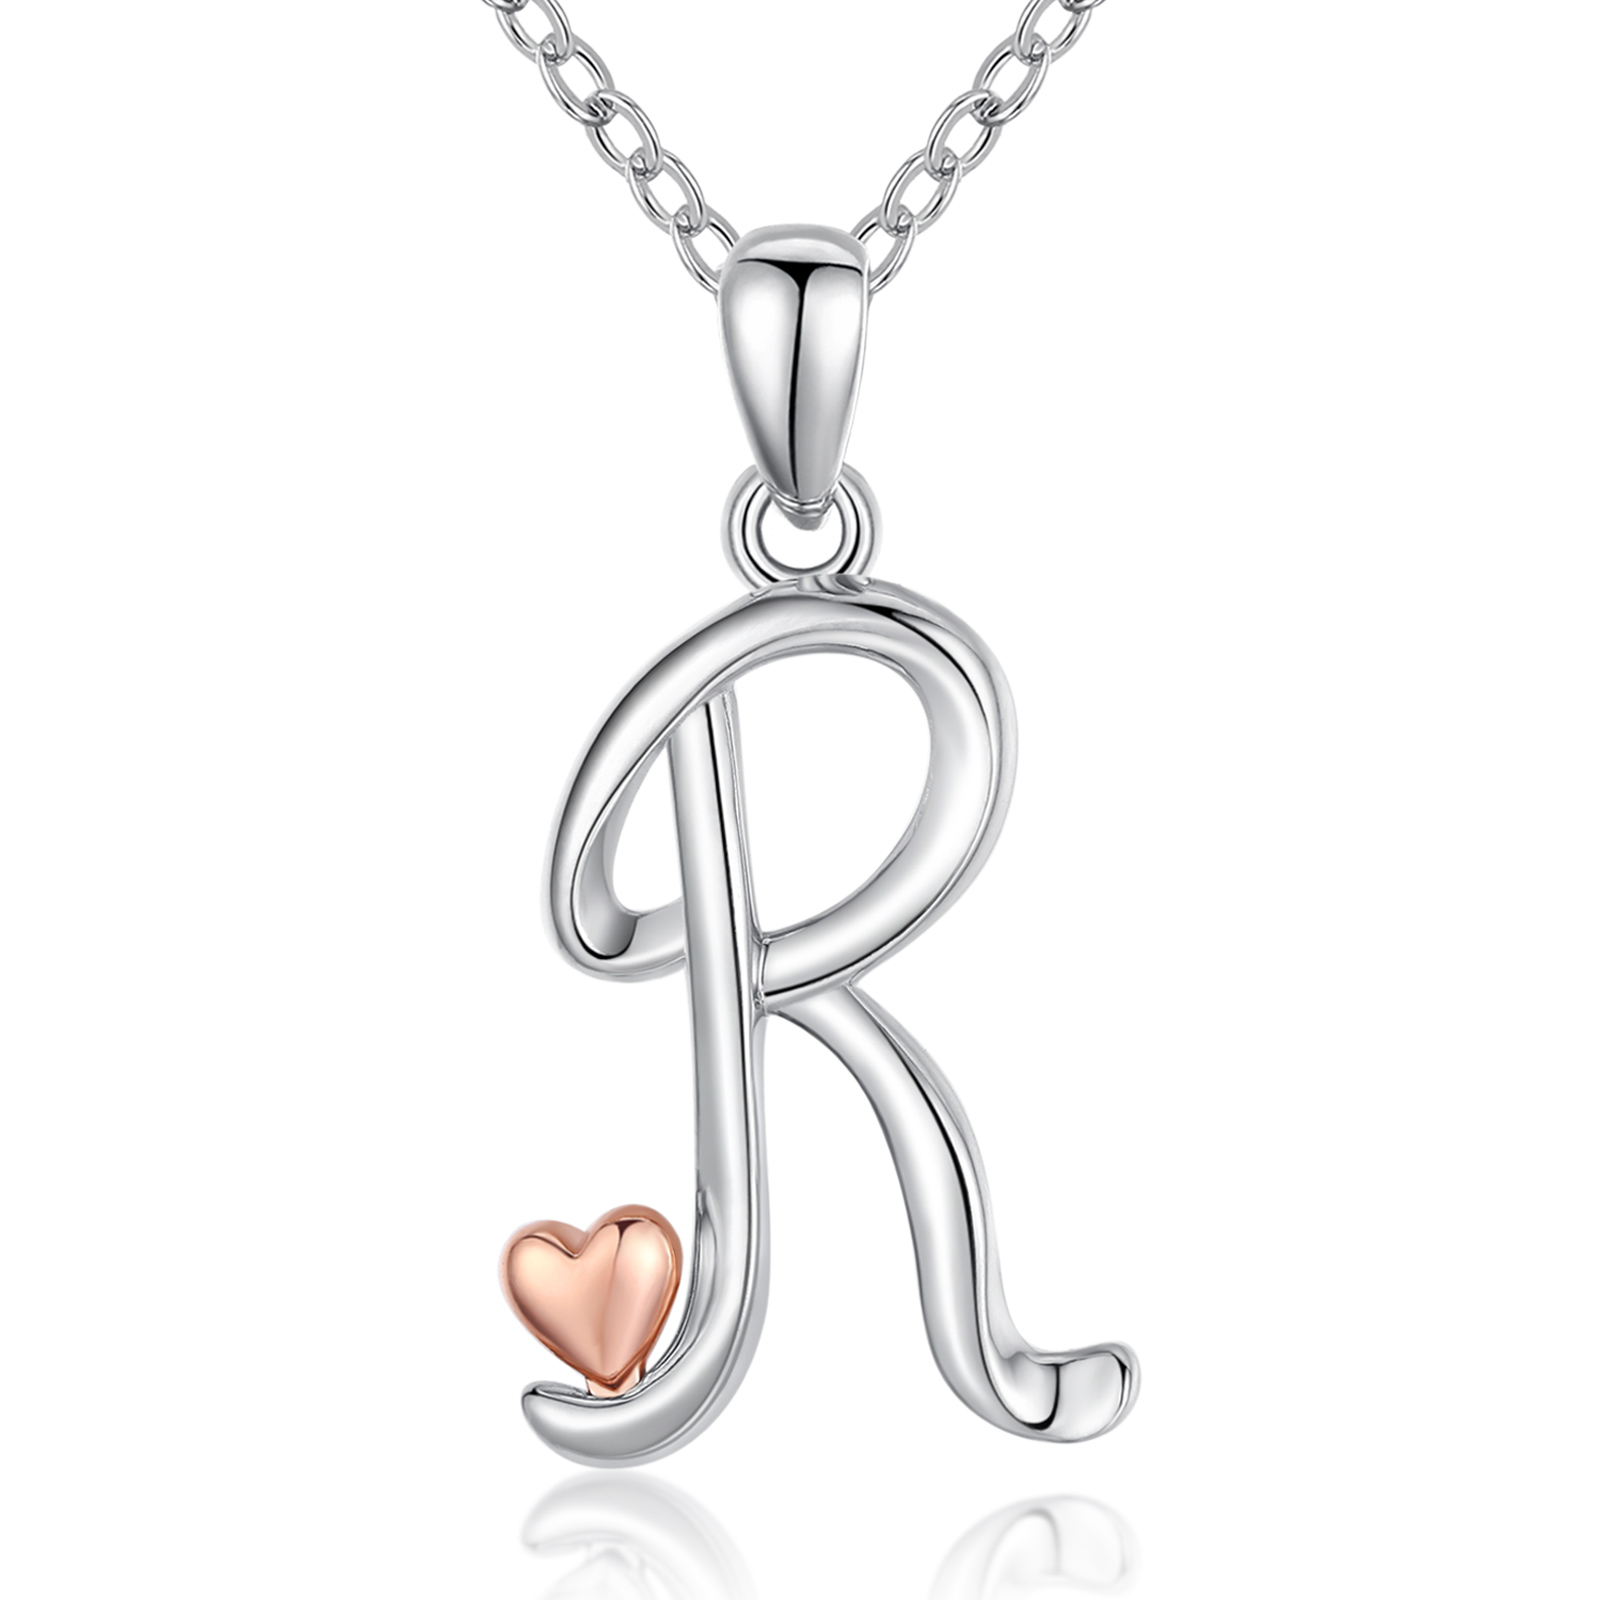 Merryshine Jewelry hot selling jewelry s925 sterling silver plated rhodium letter R initial pendant necklace